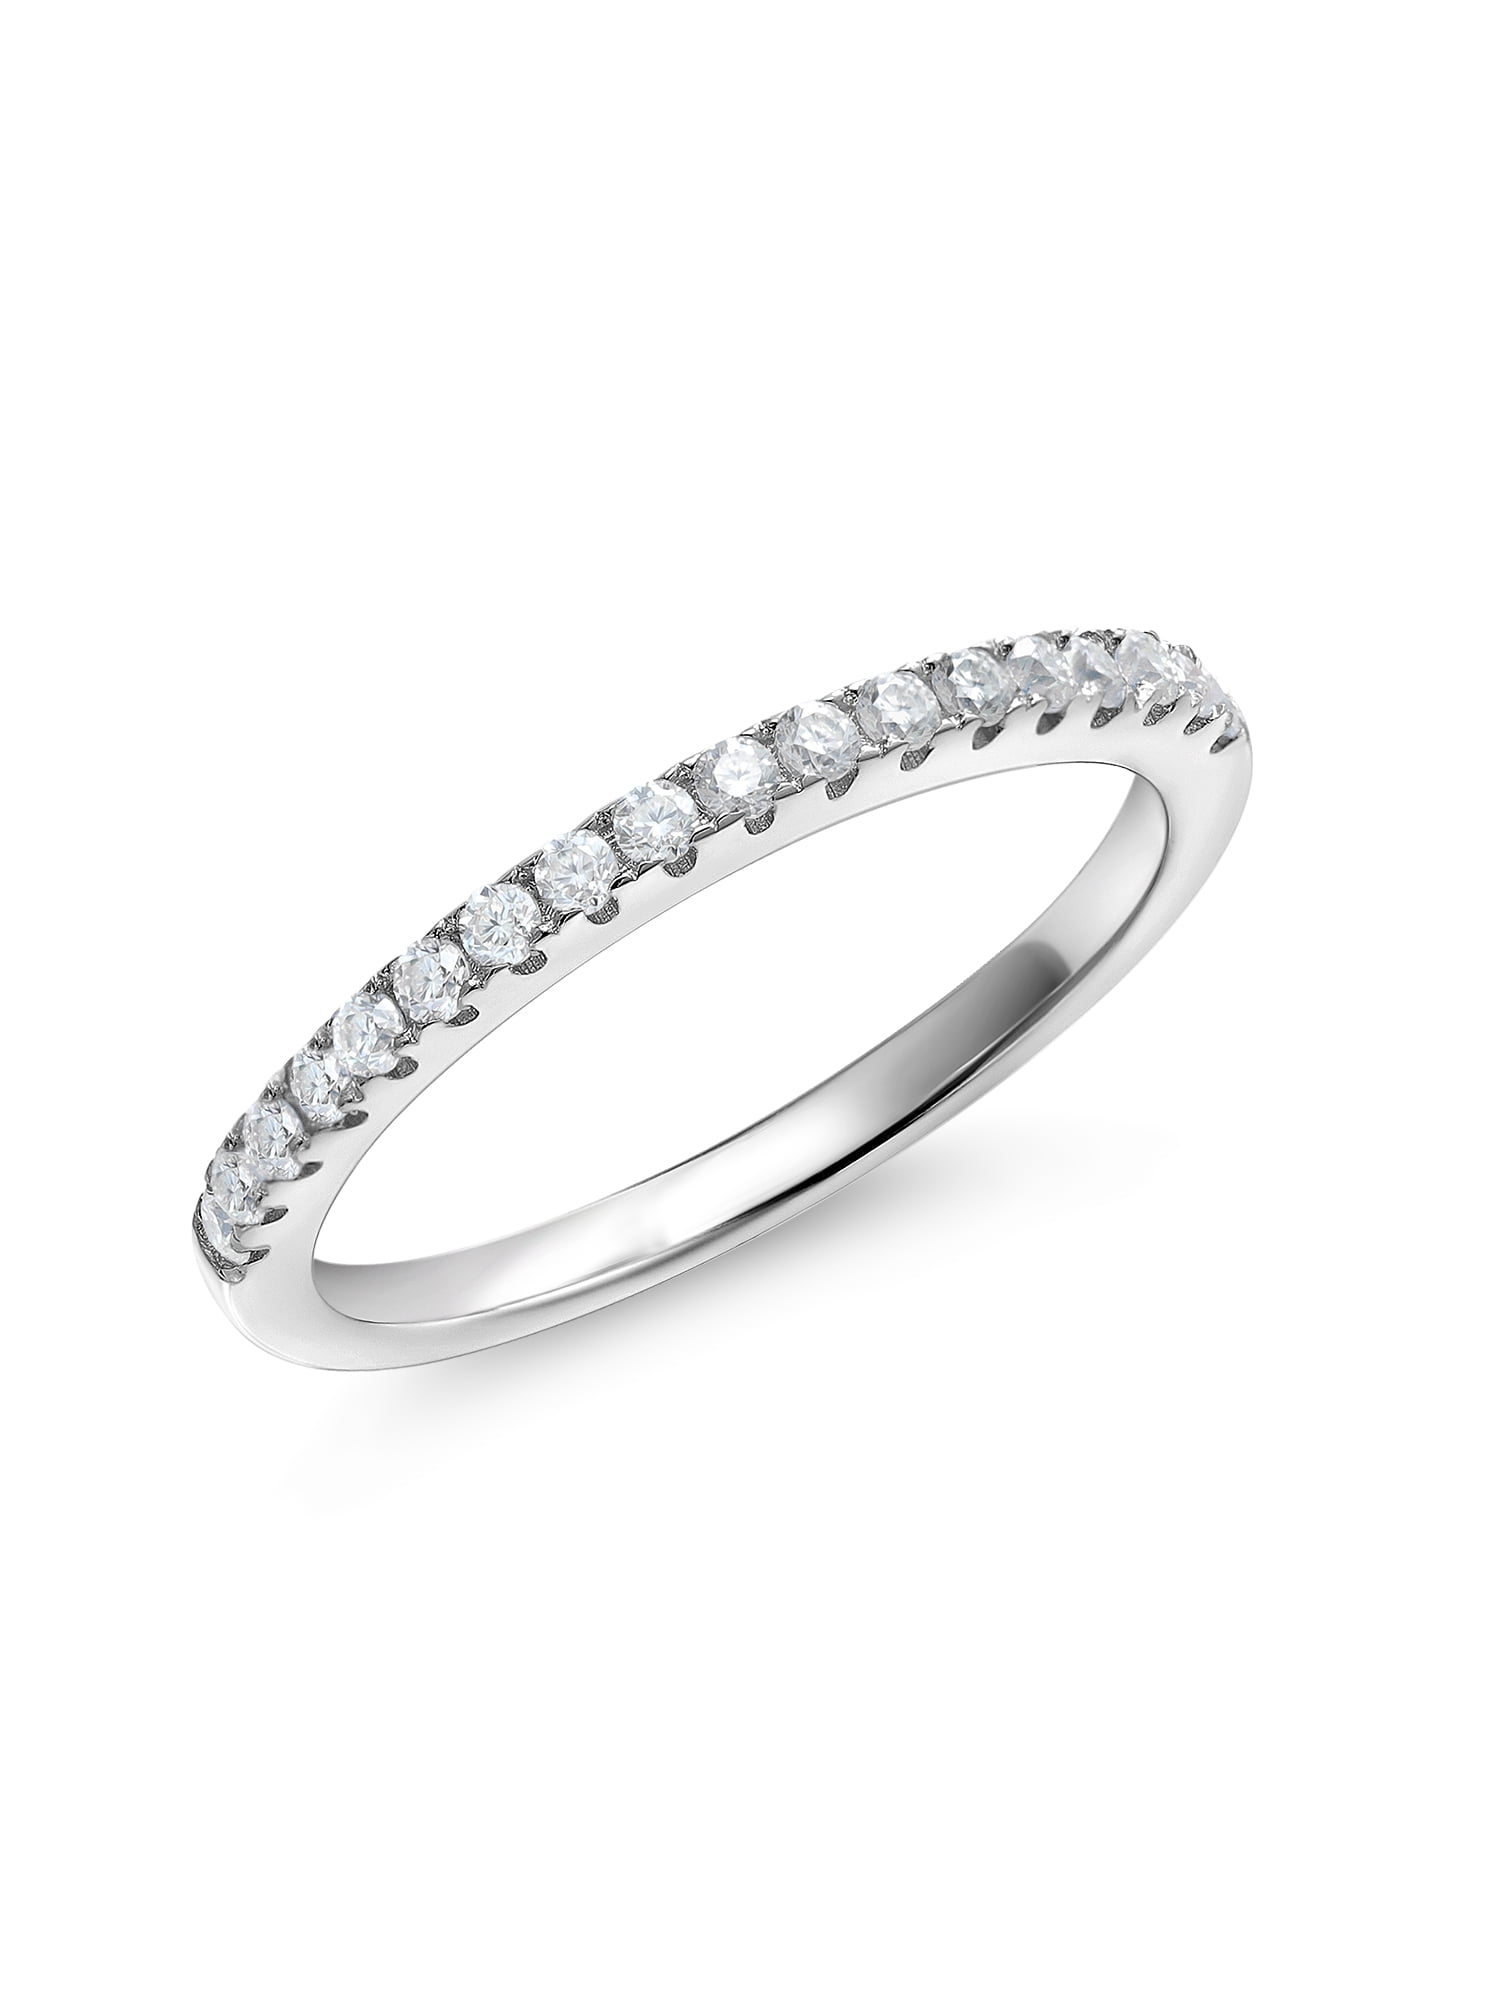 s7 14K Gold Sterling Silver Stack Eternity Band Rings